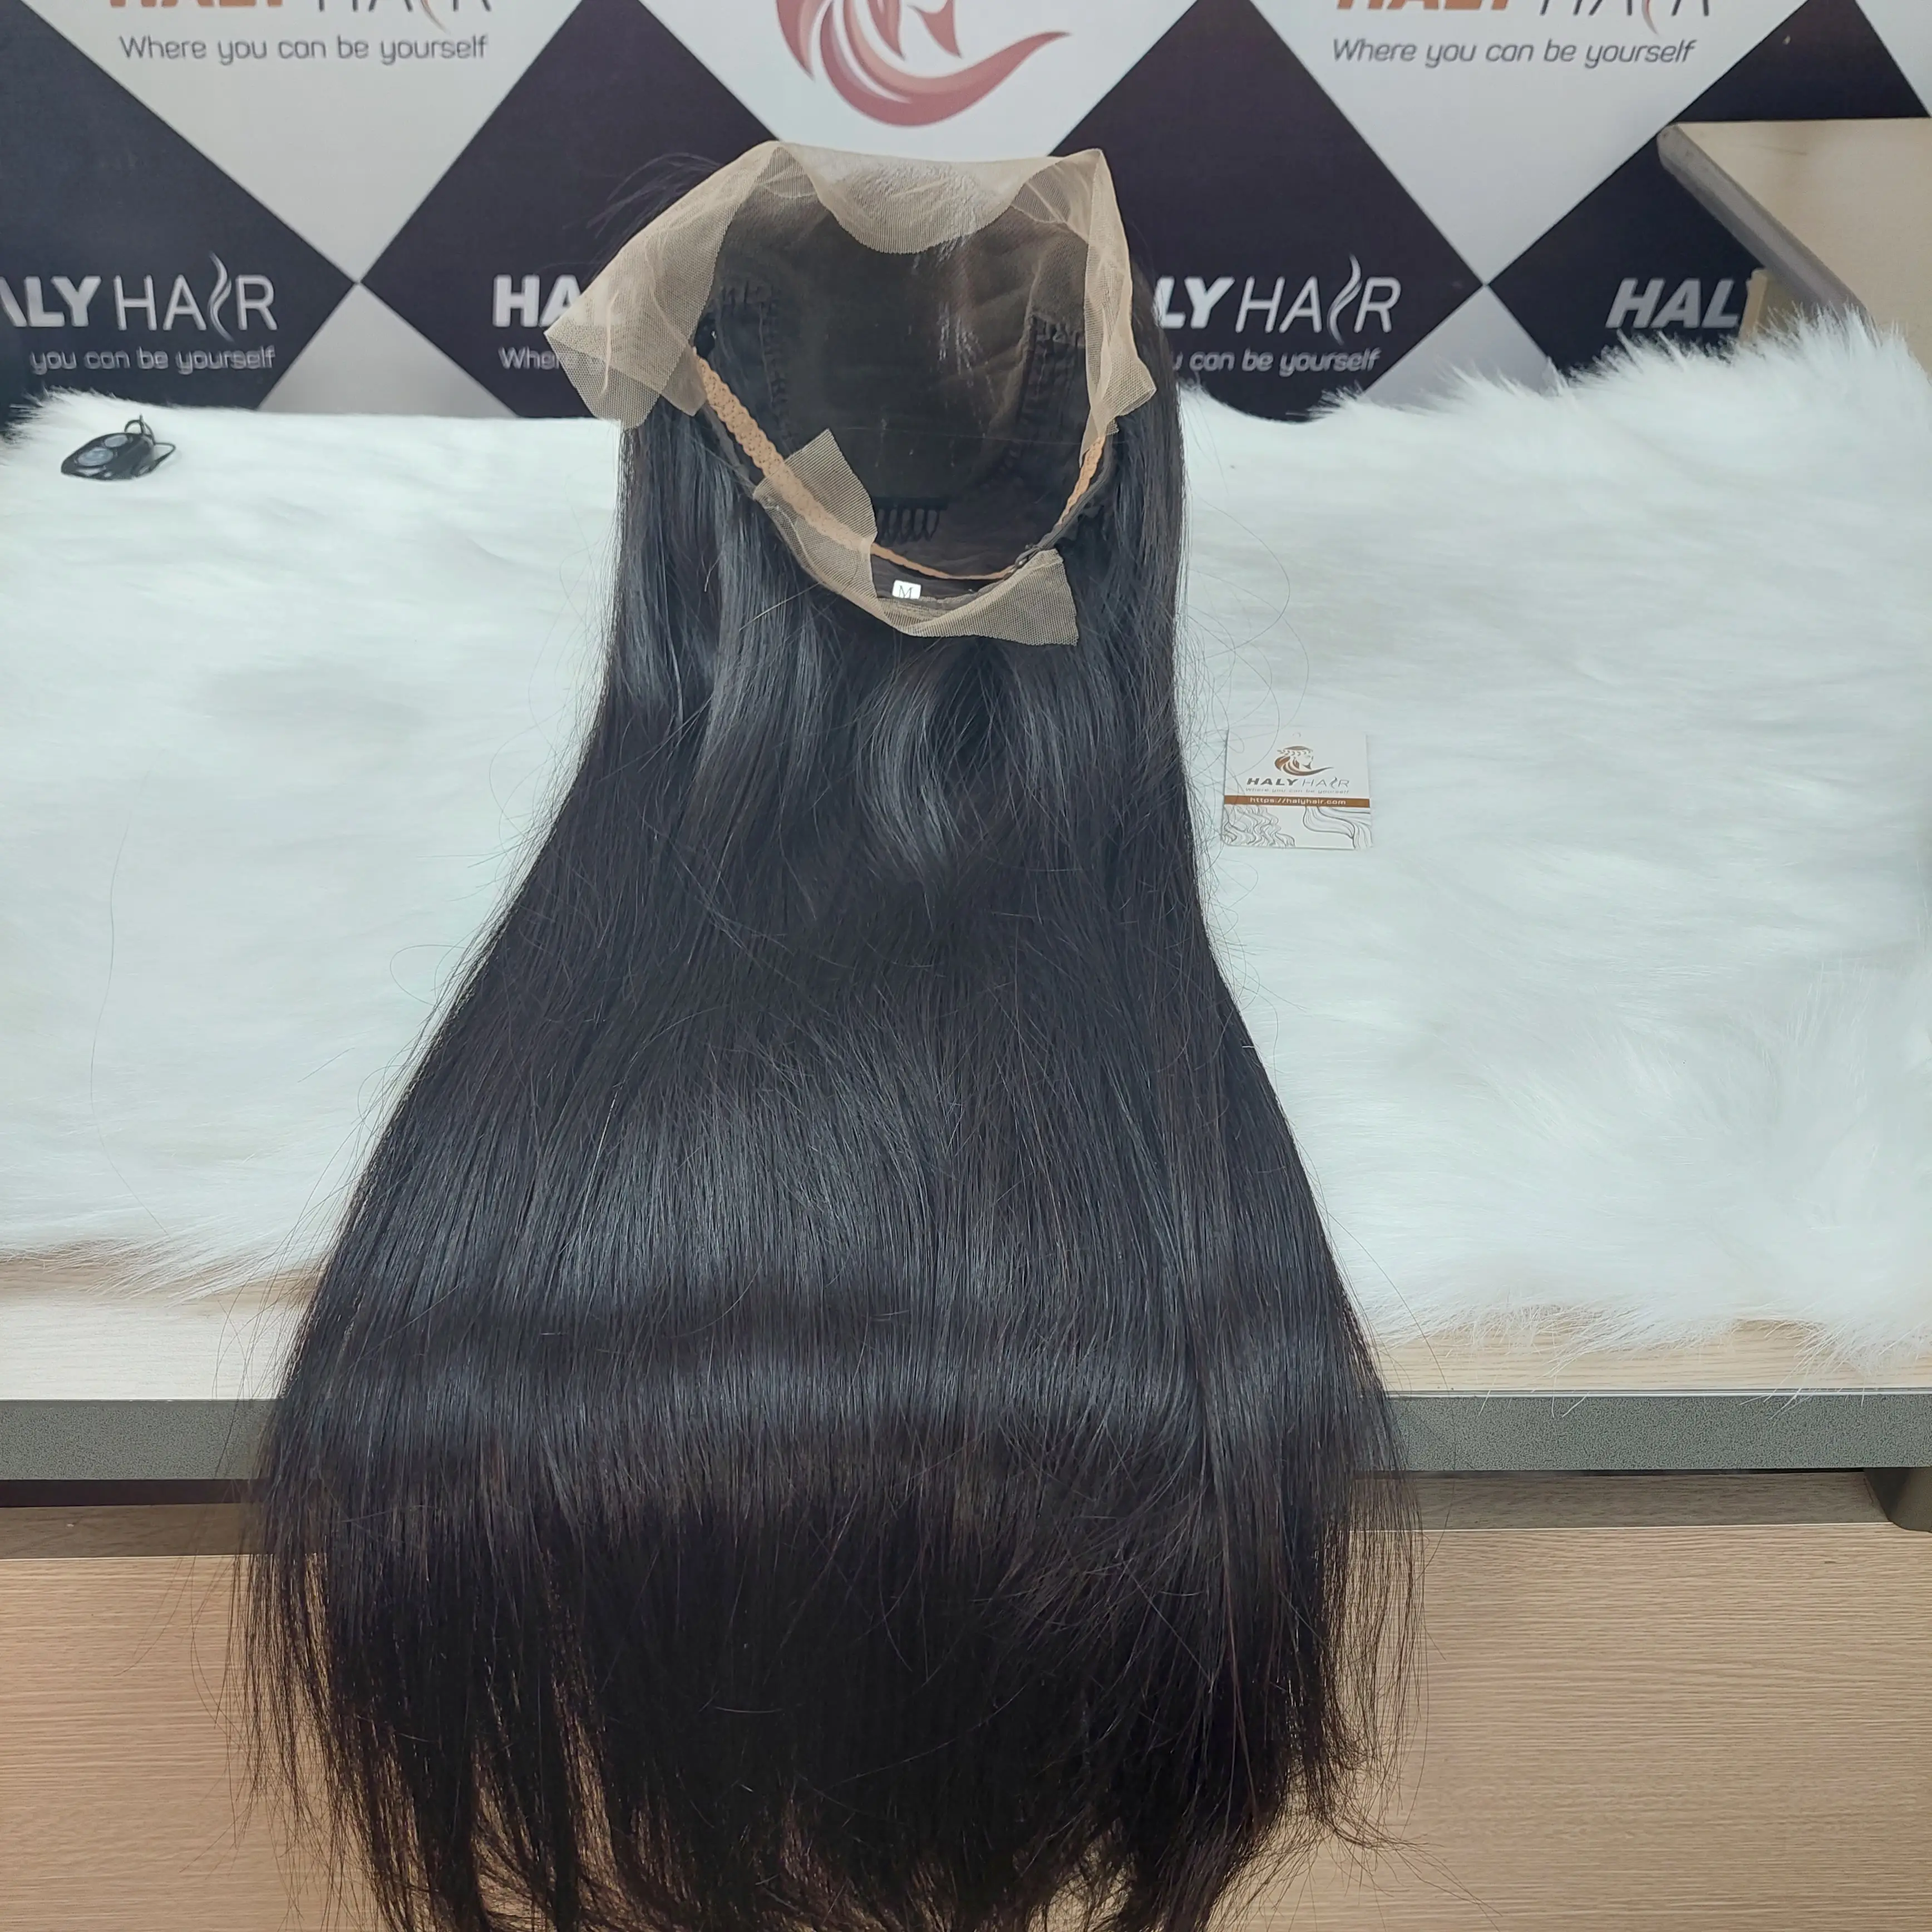 HD Lace frontal wigs human hair extension with 100% raw virgin hair from Halyhair Vietnam hair supplier best price